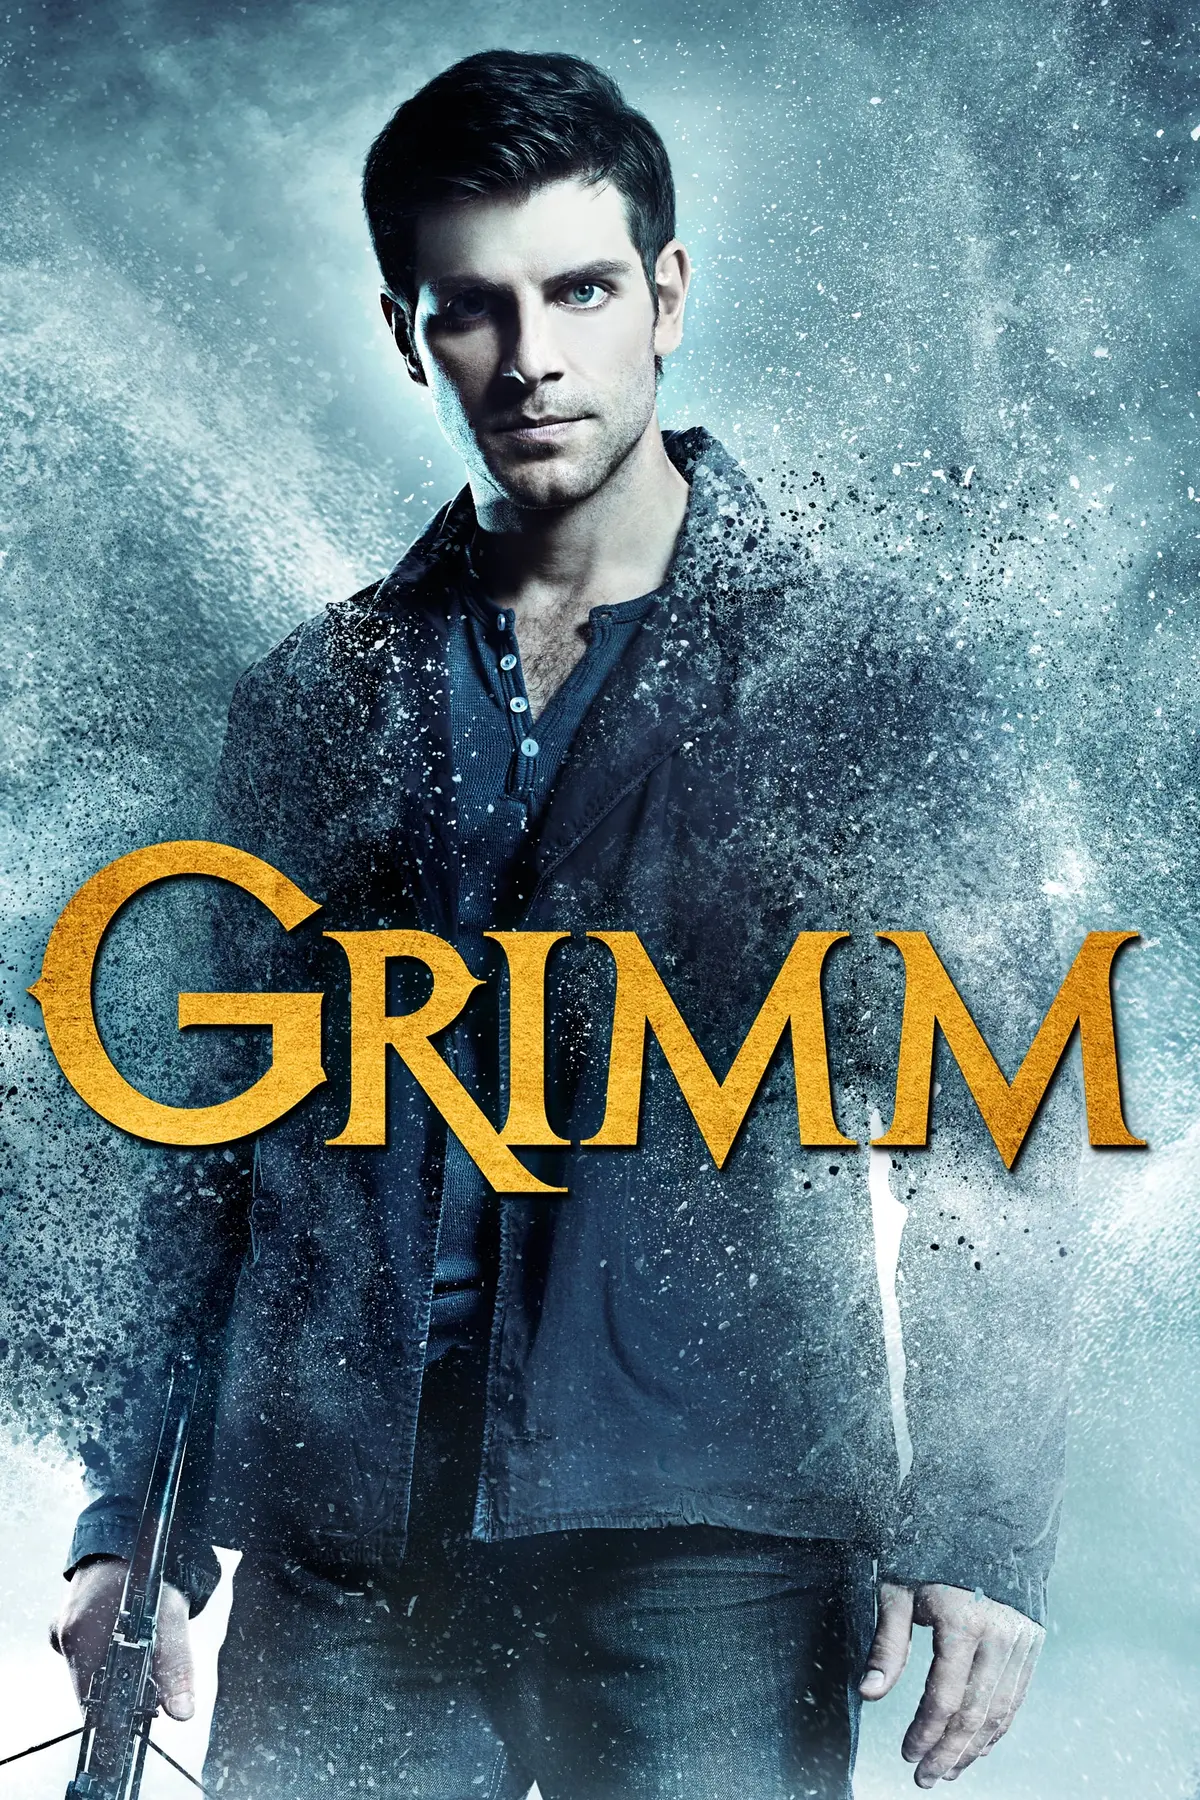 Grimm S03E02 Zombie or not zombie